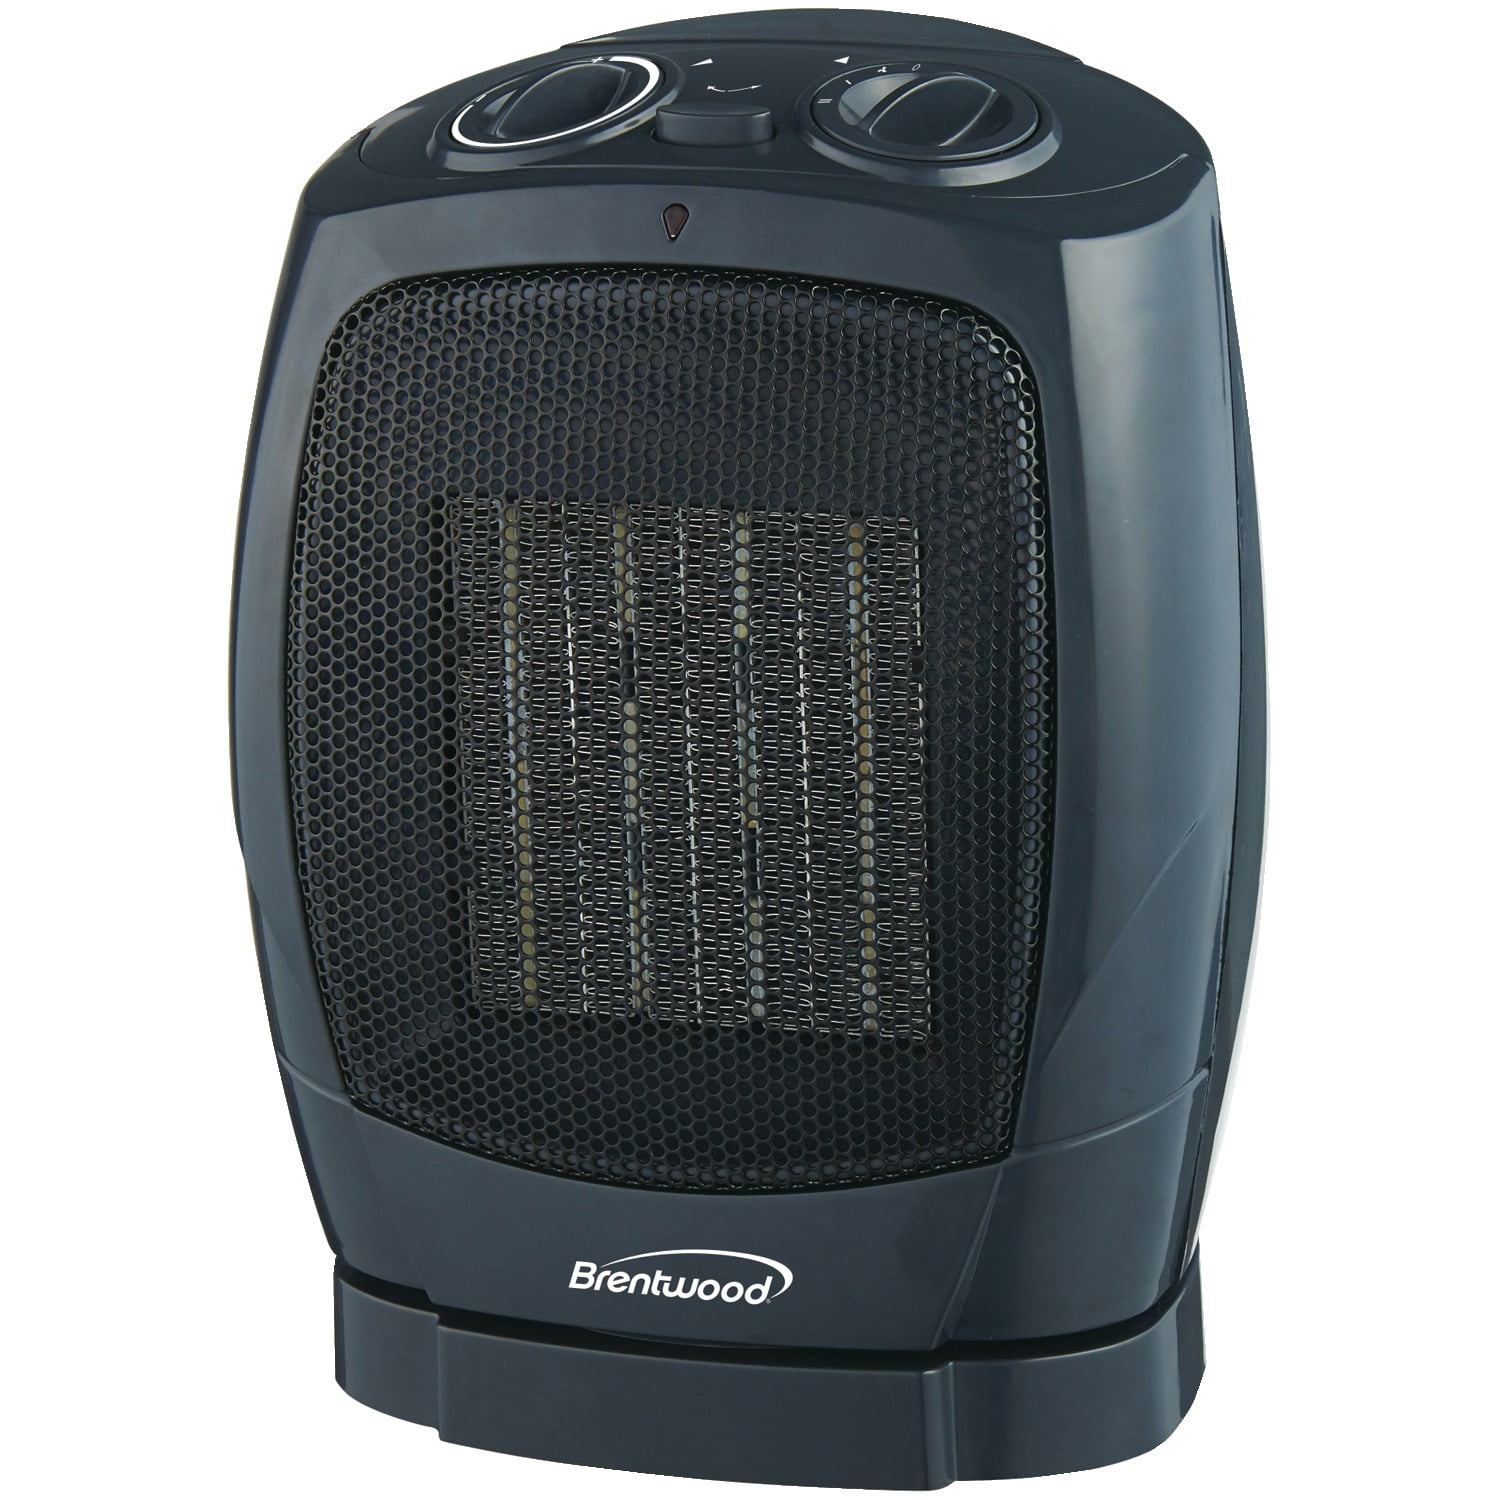 Picture of Brentwood H-C1600 Ceramic Oscillationg Heater - Black